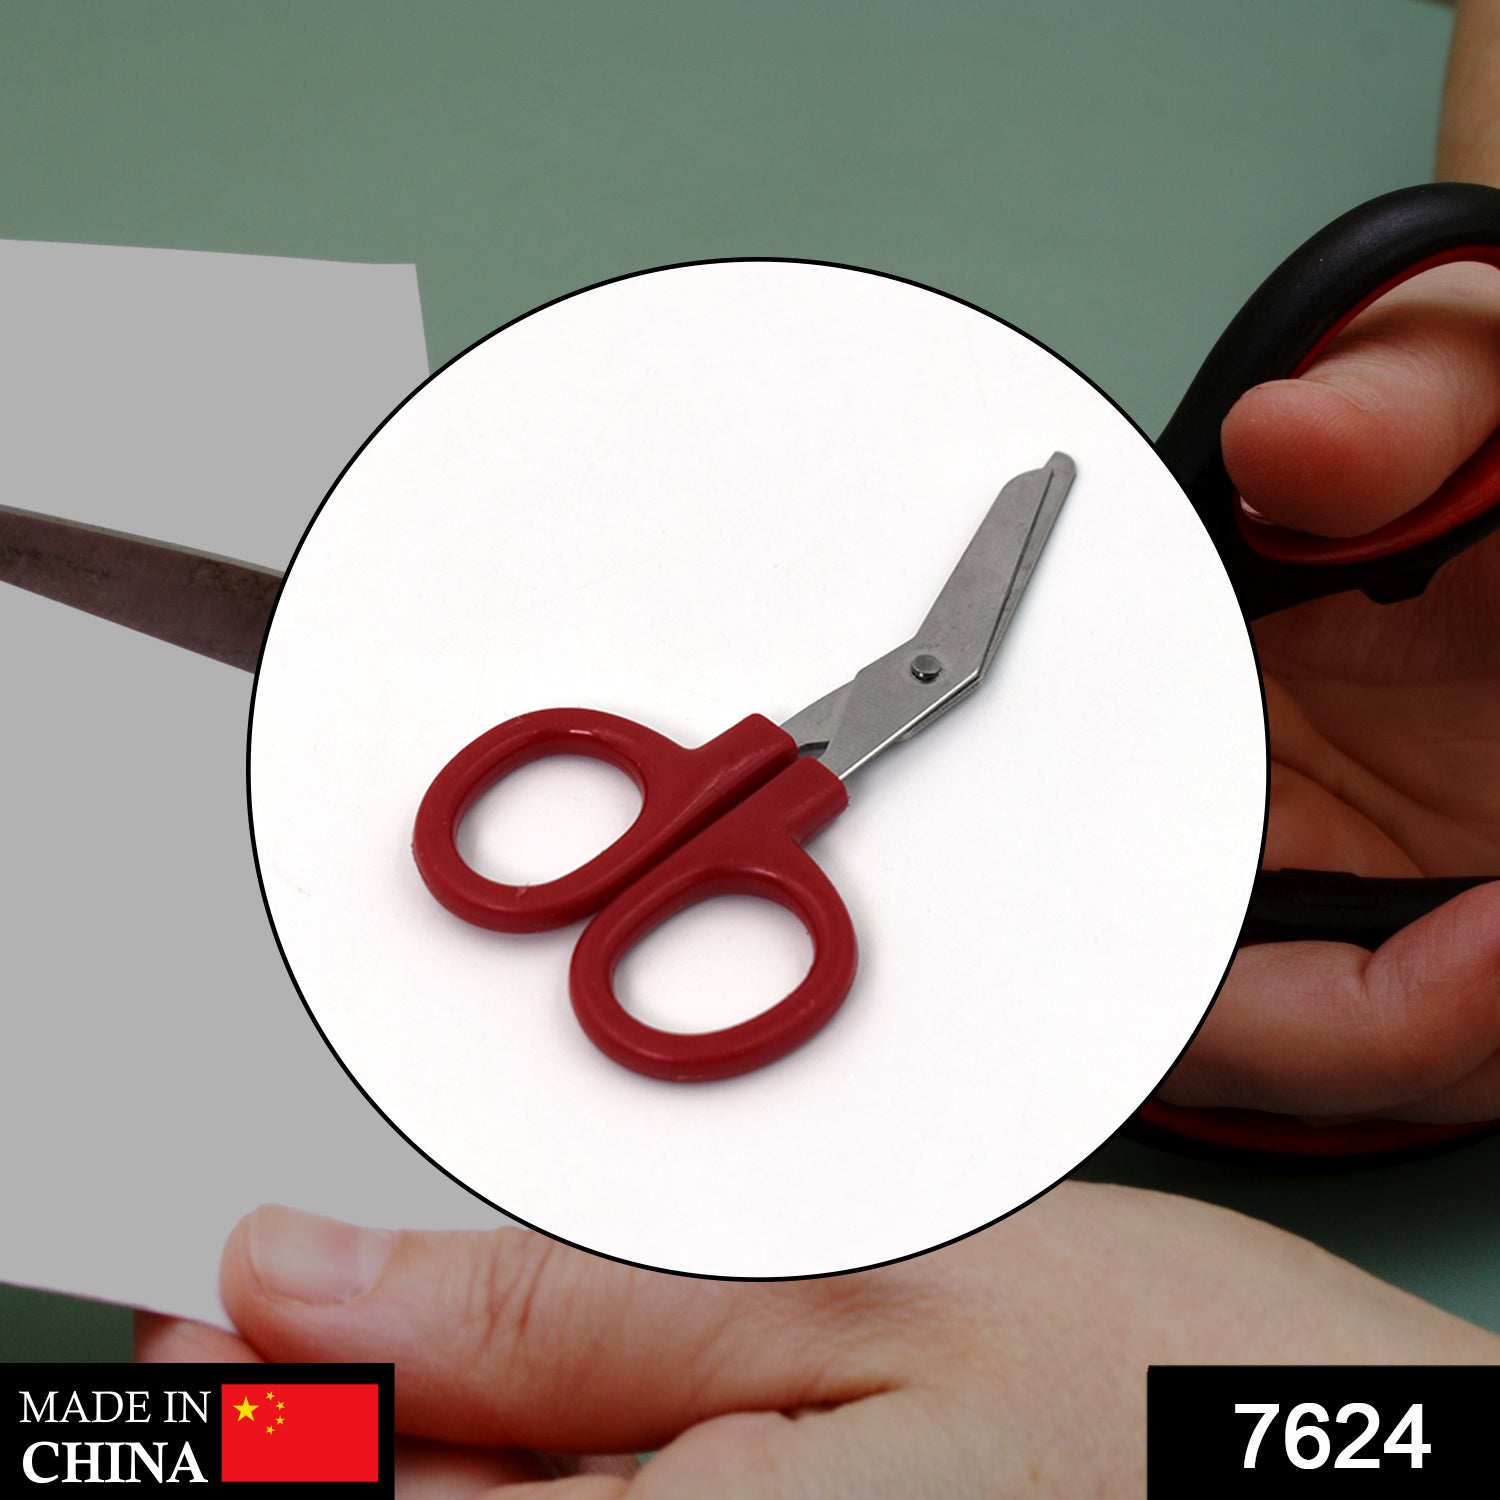 7624 cn Scissor For Cutting And Designing Purposes By Students And All Etc. DeoDap